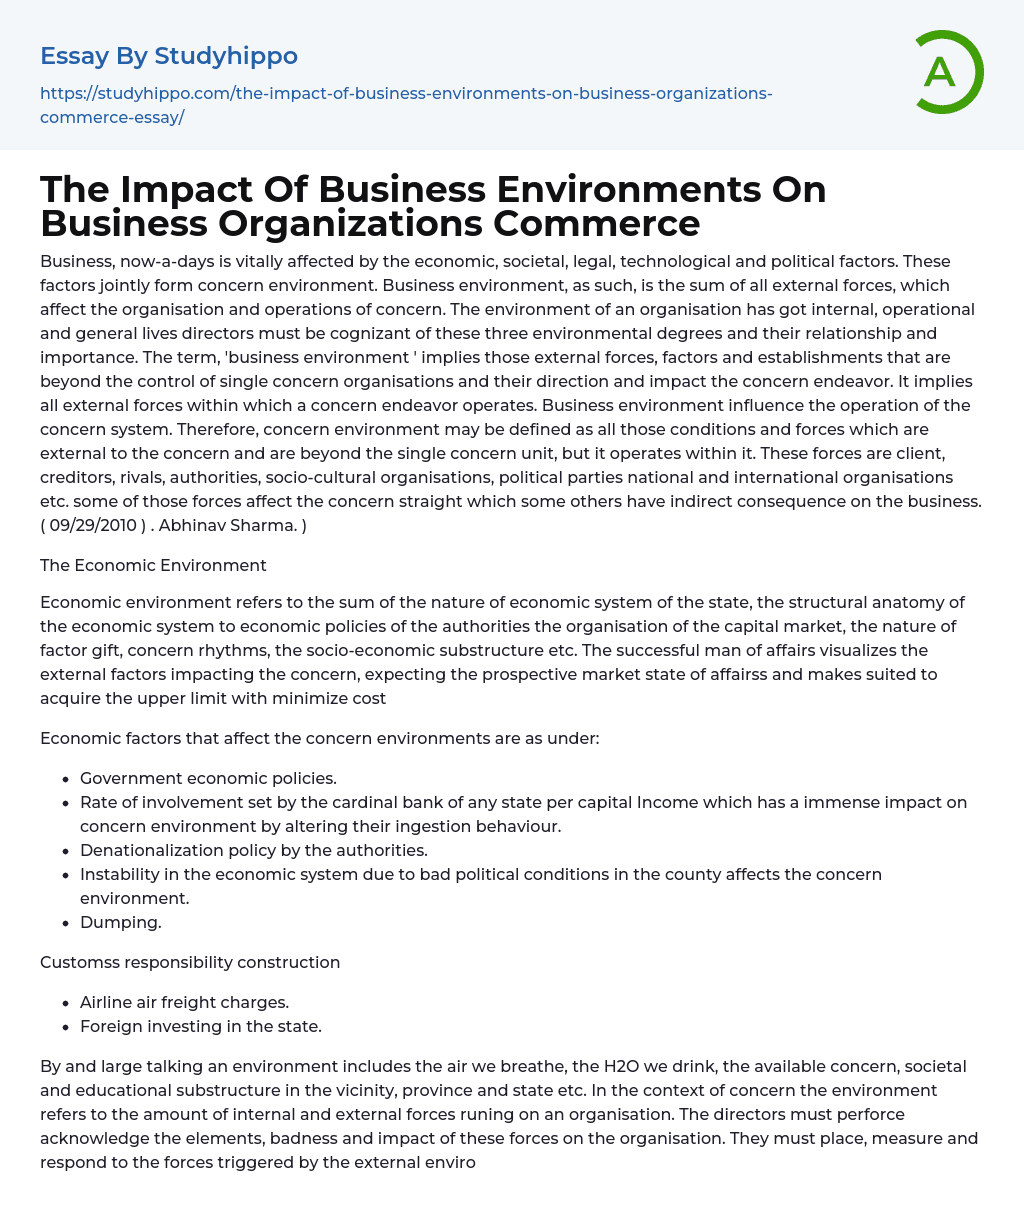 The Impact Of Business Environments On Business Organizations Commerce Essay Example